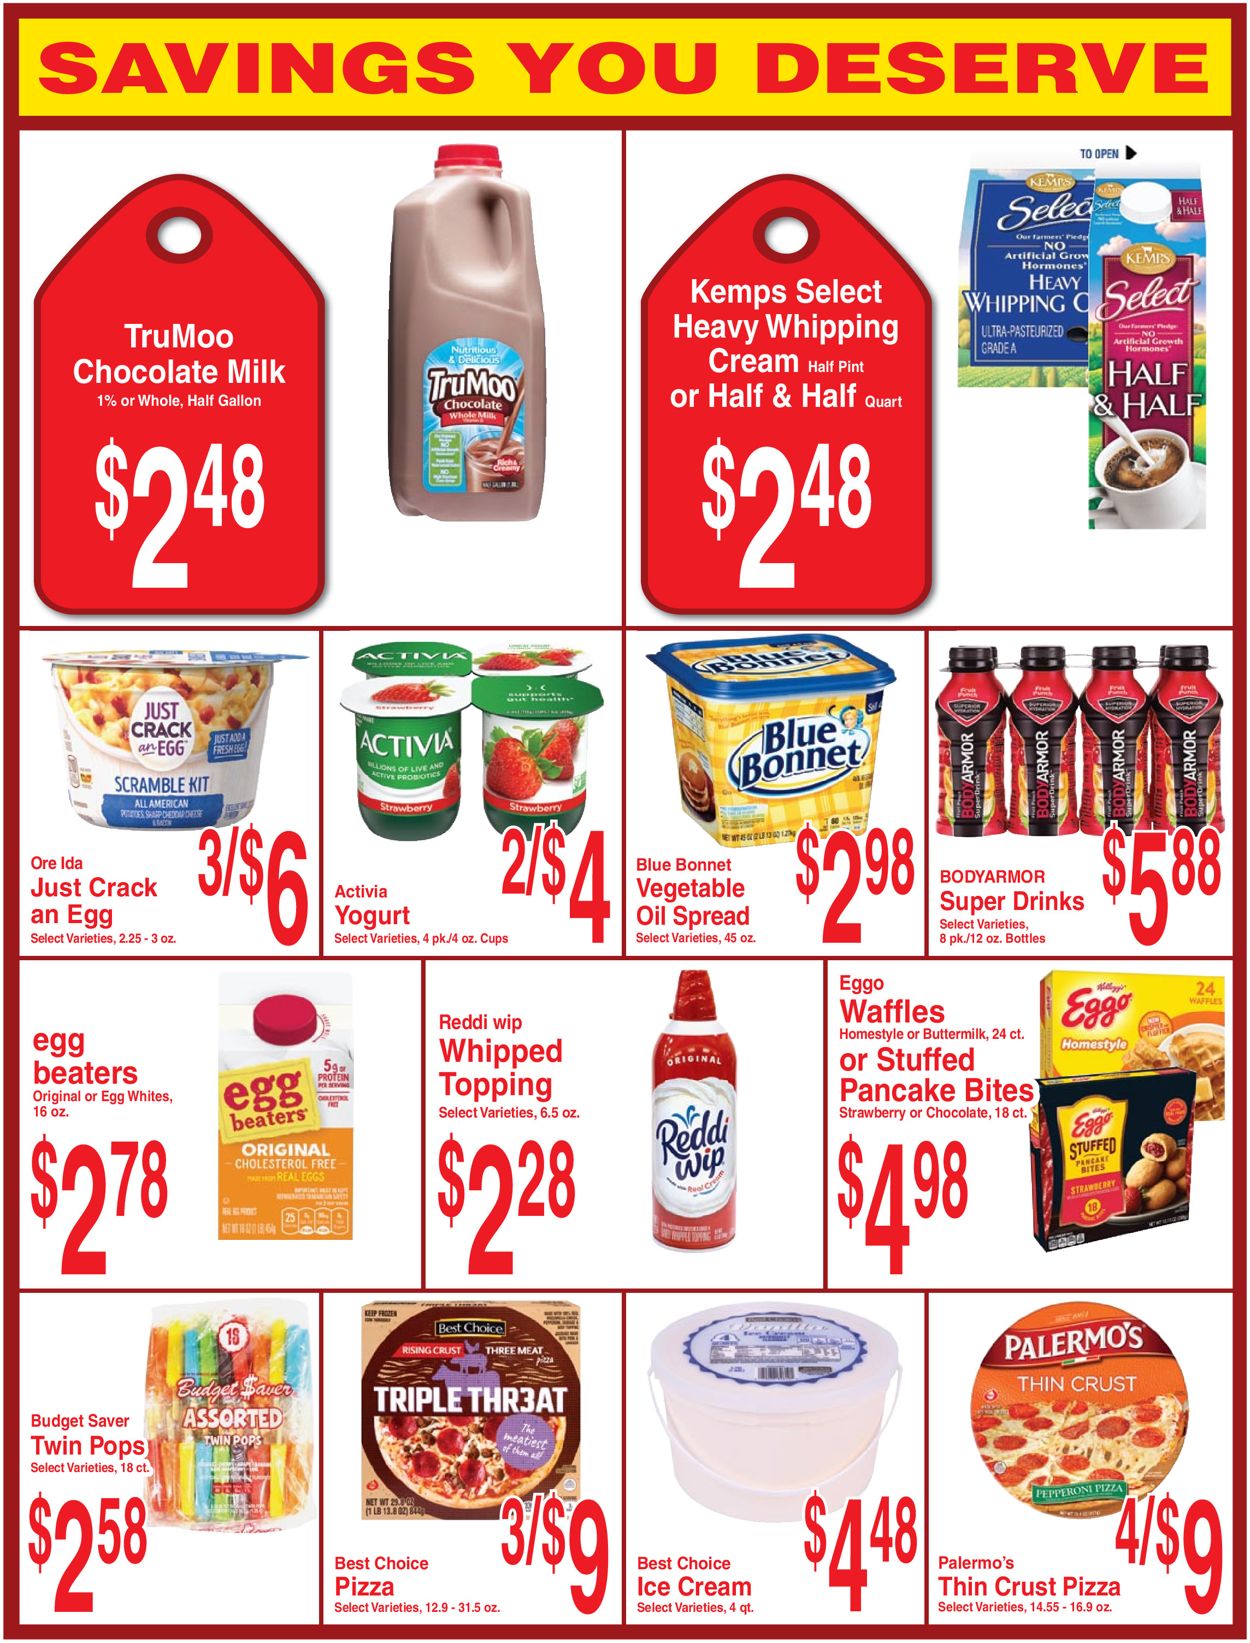 Super Saver Ad from 06/16/2021